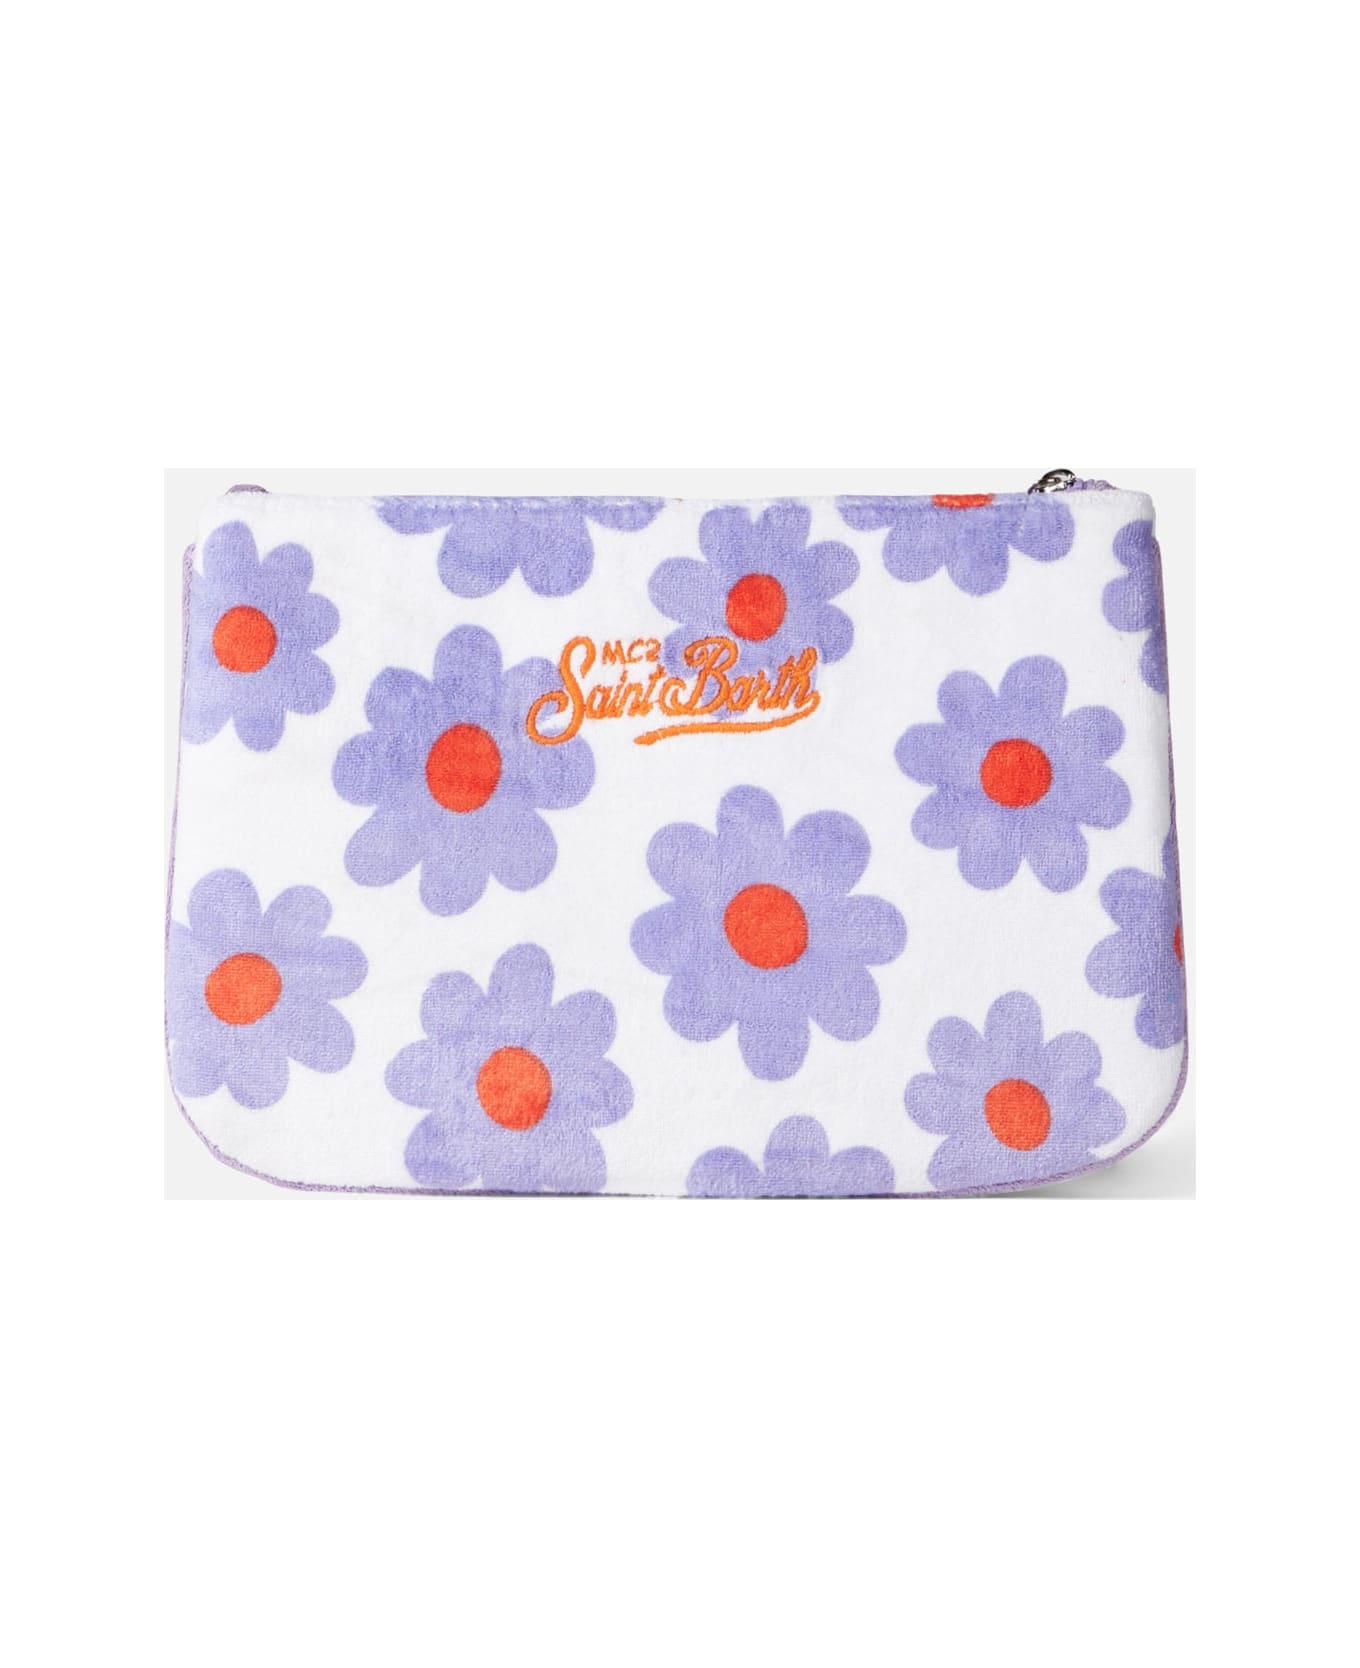 MC2 Saint Barth Parisienne Terry Pouch Bag With Violet And Orange Daisy Print - PINK クラッチバッグ